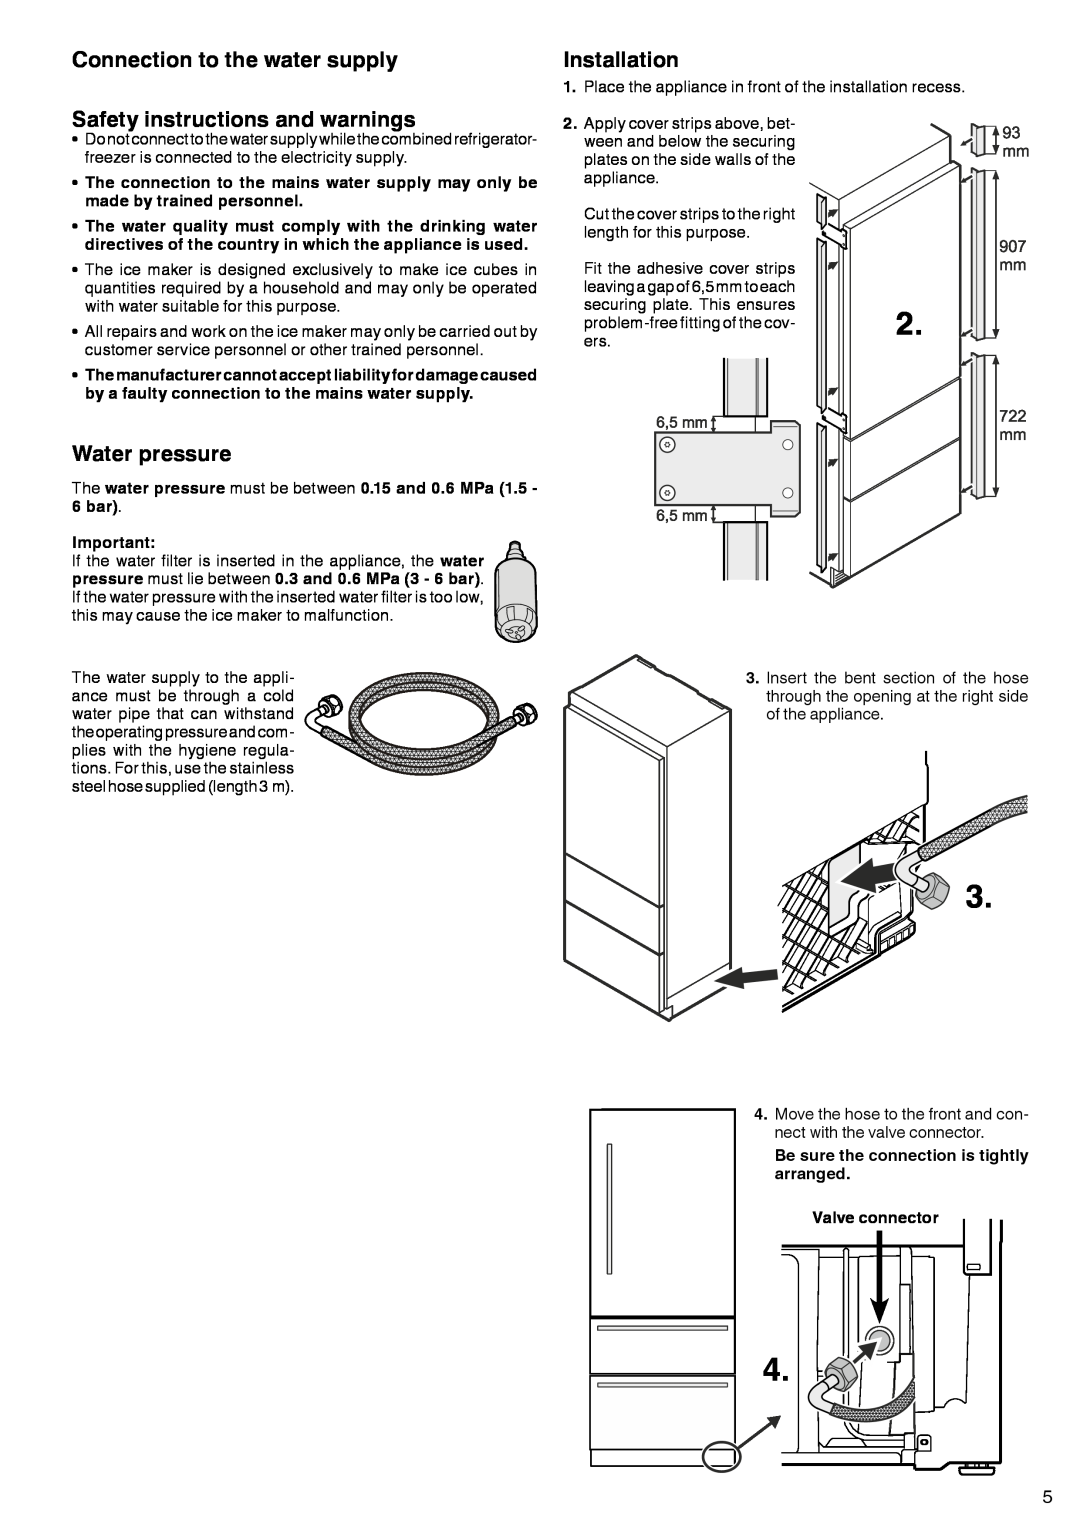 Liebherr 7083 461-00 manual Connection to the water supply Safety instructions and warnings, Water pressure, Installation 